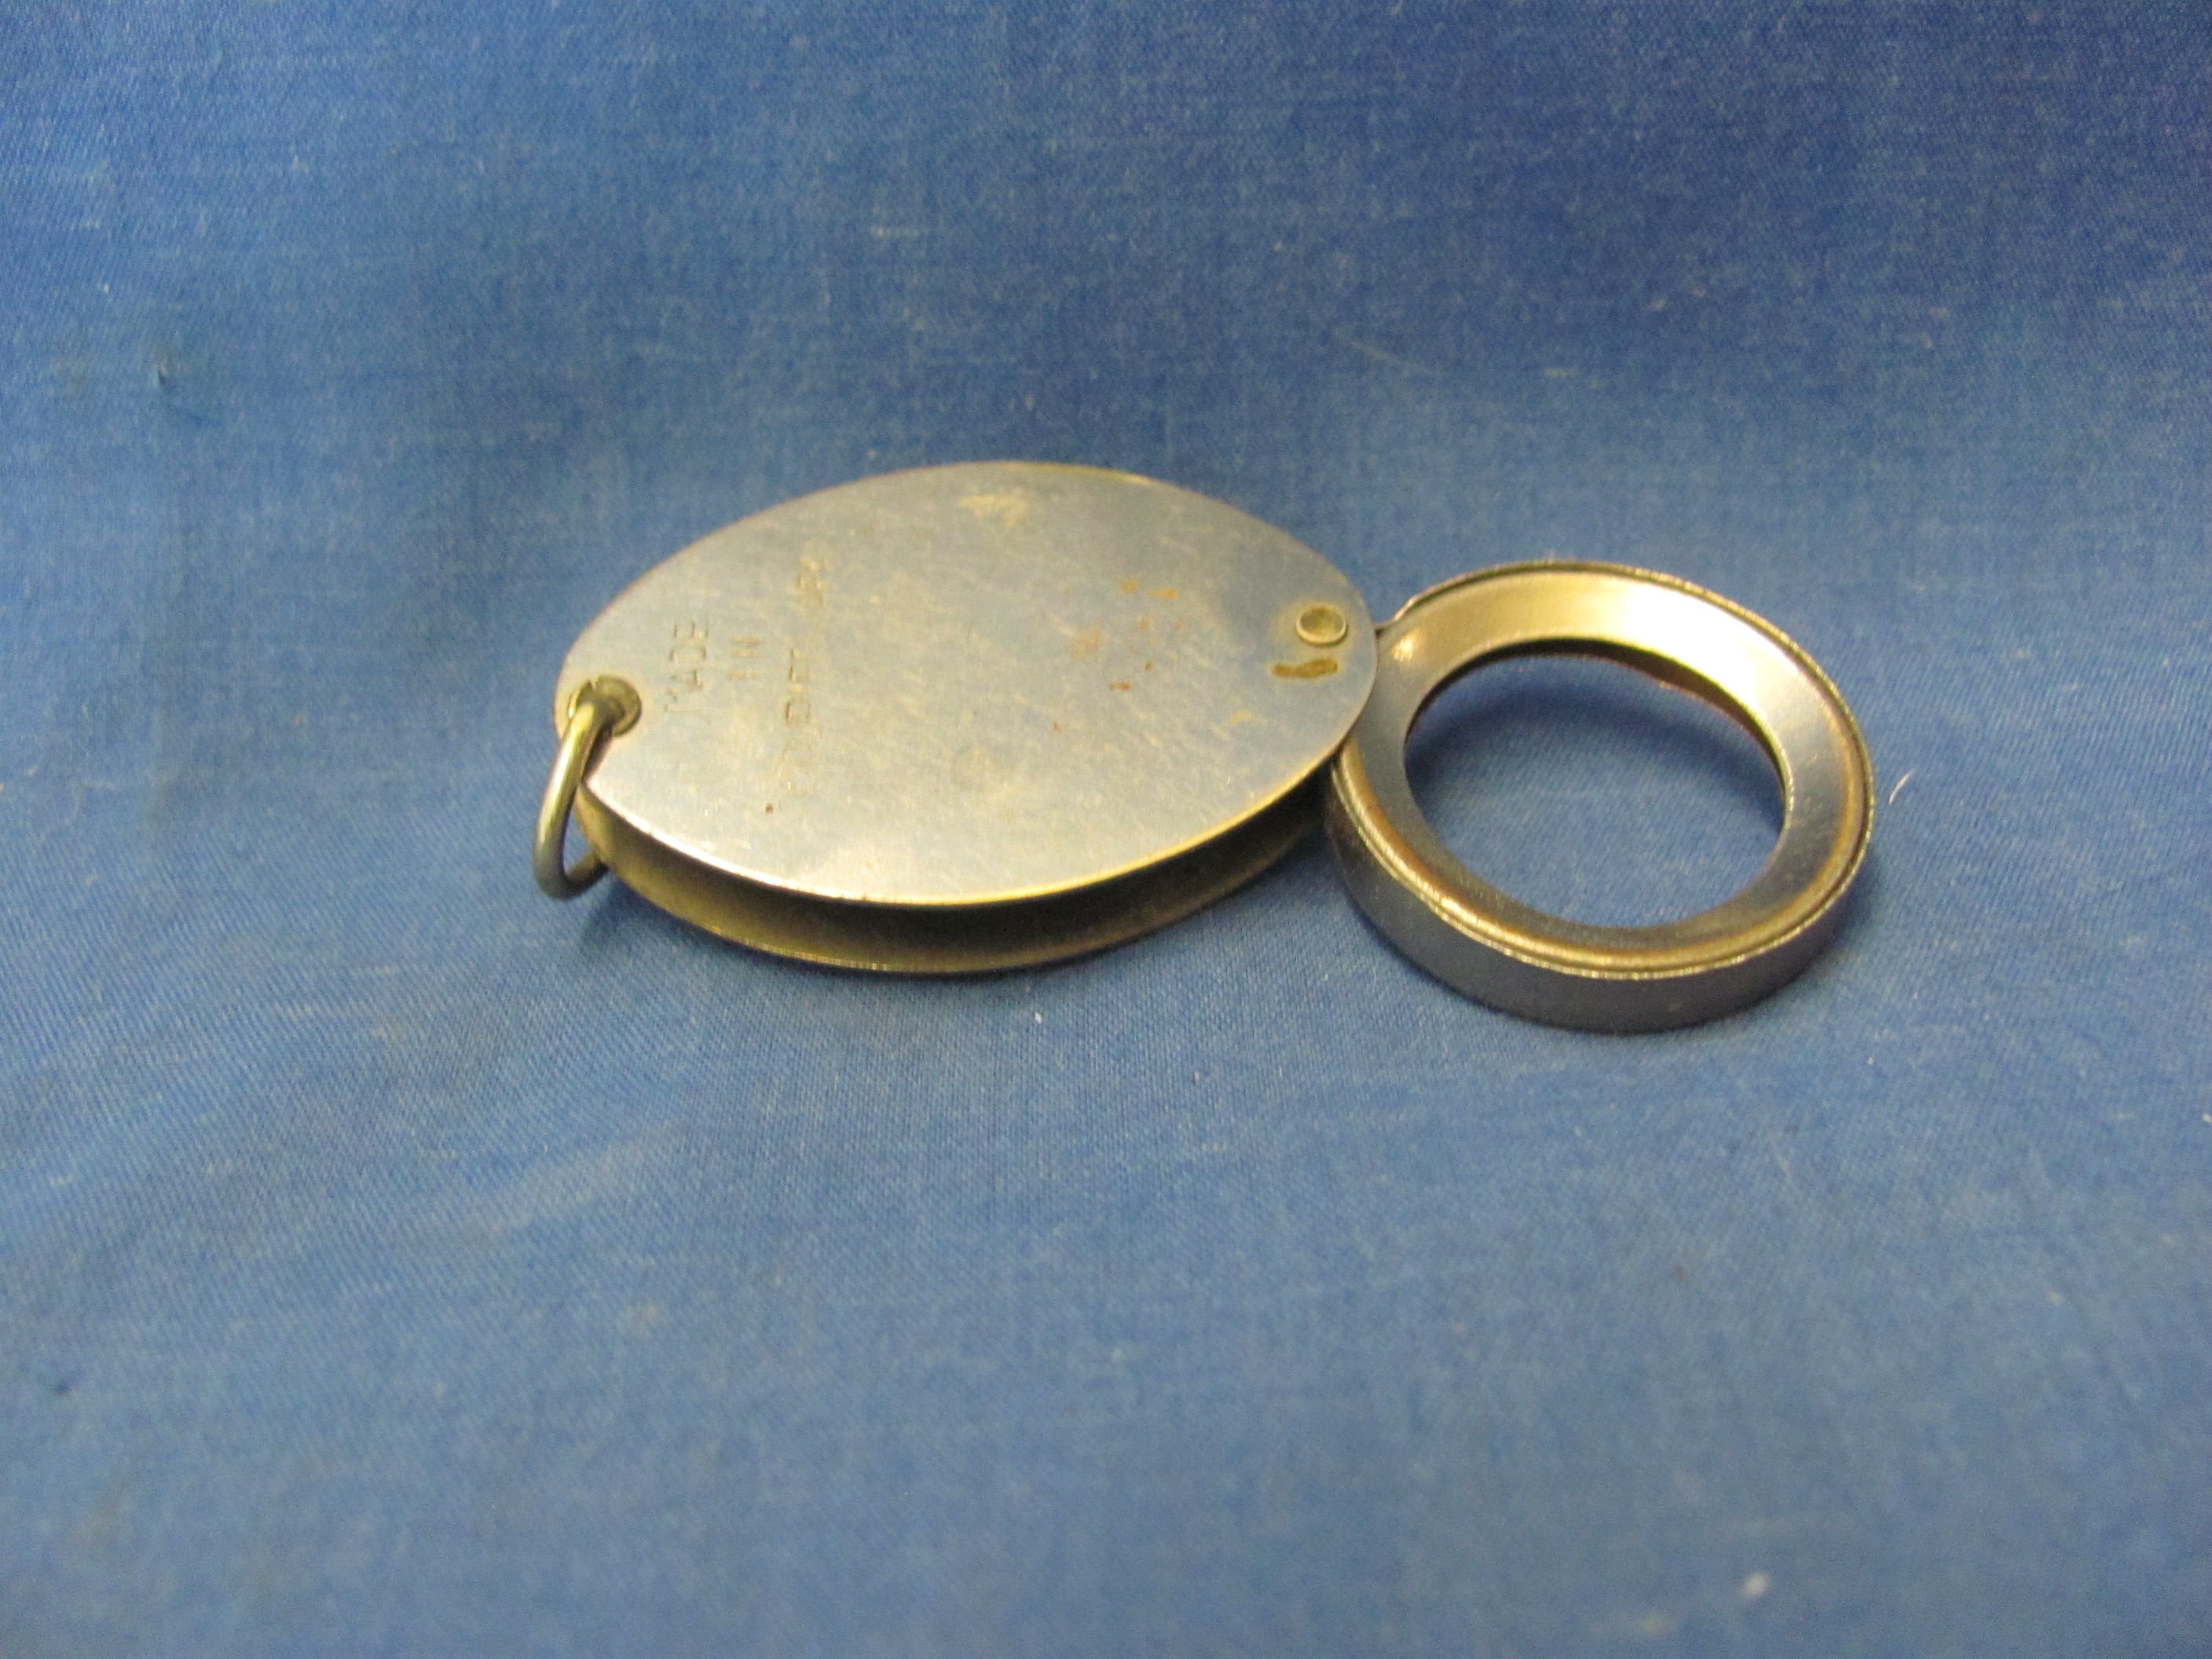 Sold at Auction: A SMALL BRASS MAGNIFYING GLASS on a stand.